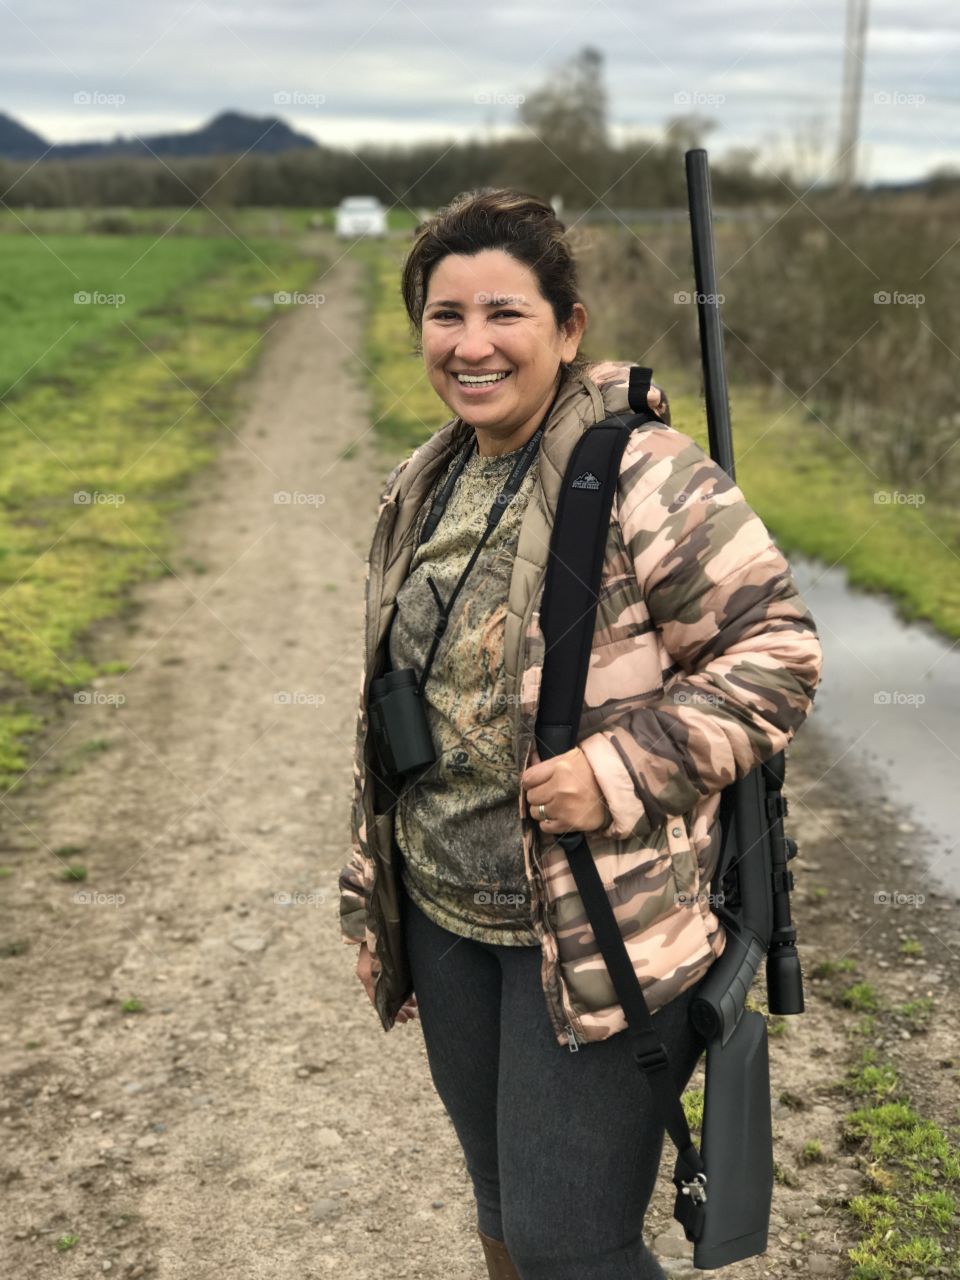 A woman enjoying the outdoors. Nothing quite like an evening hunt to clear and focus the mind. 